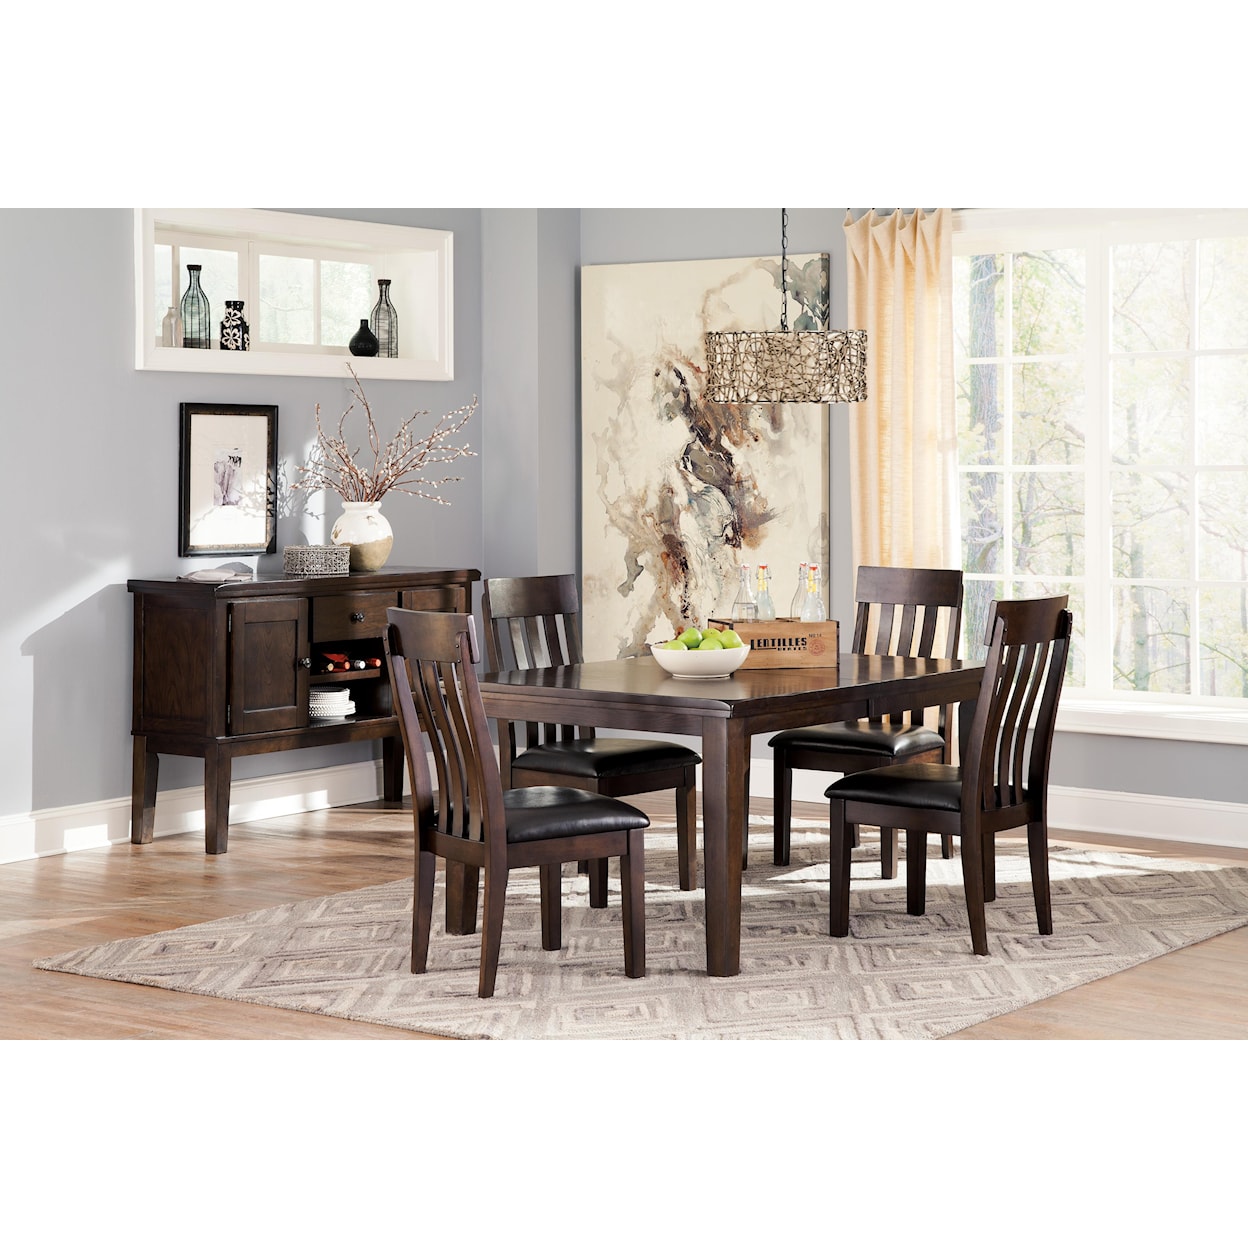 Signature Design by Ashley Furniture Haddigan Casual Dining Room Group